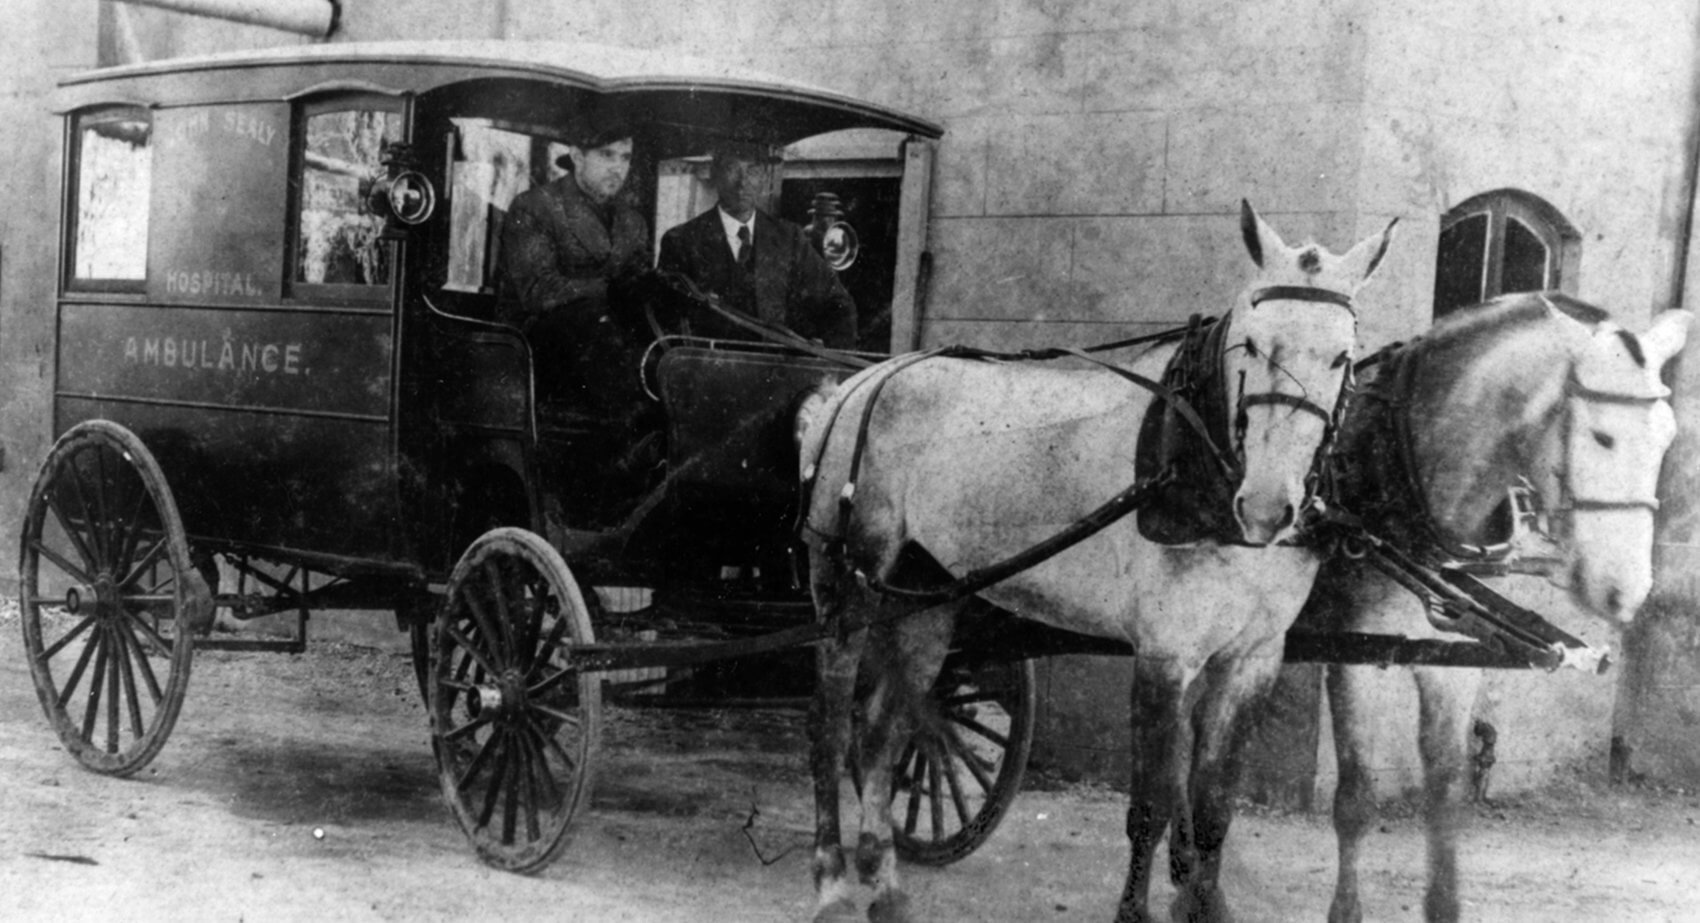 A John Sealy Hospital ambulance pictured in 1910.